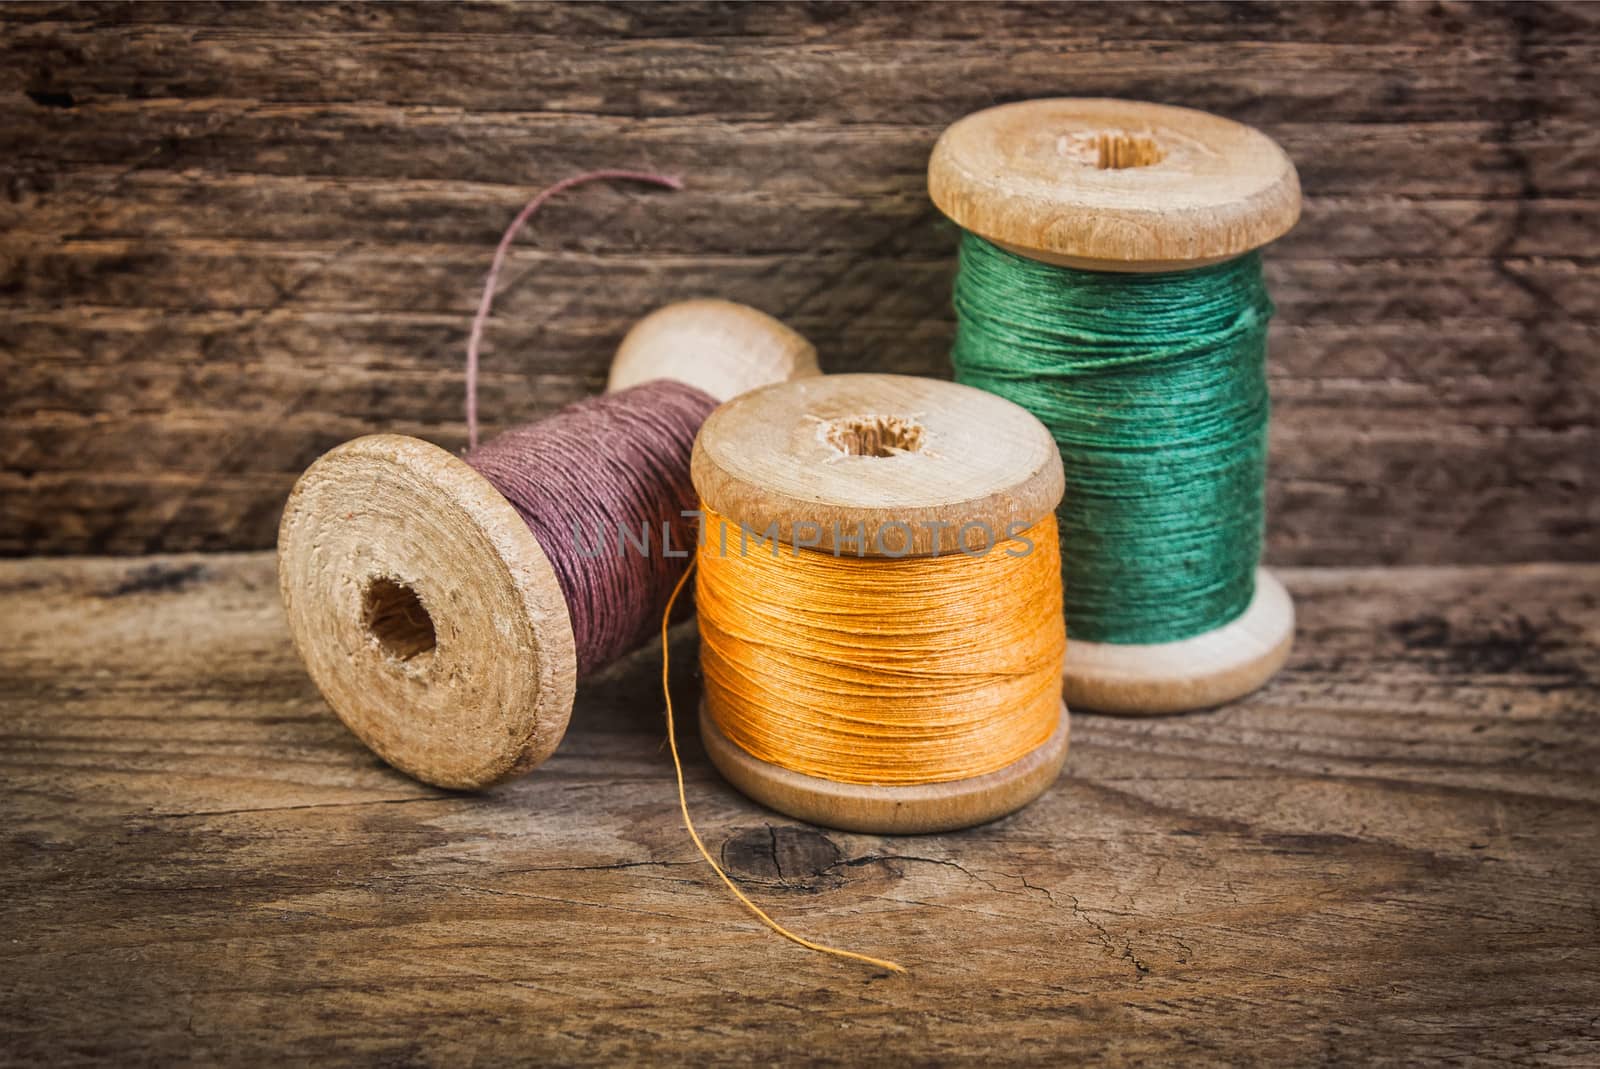 Spools of thread on a background of the old wooden planks